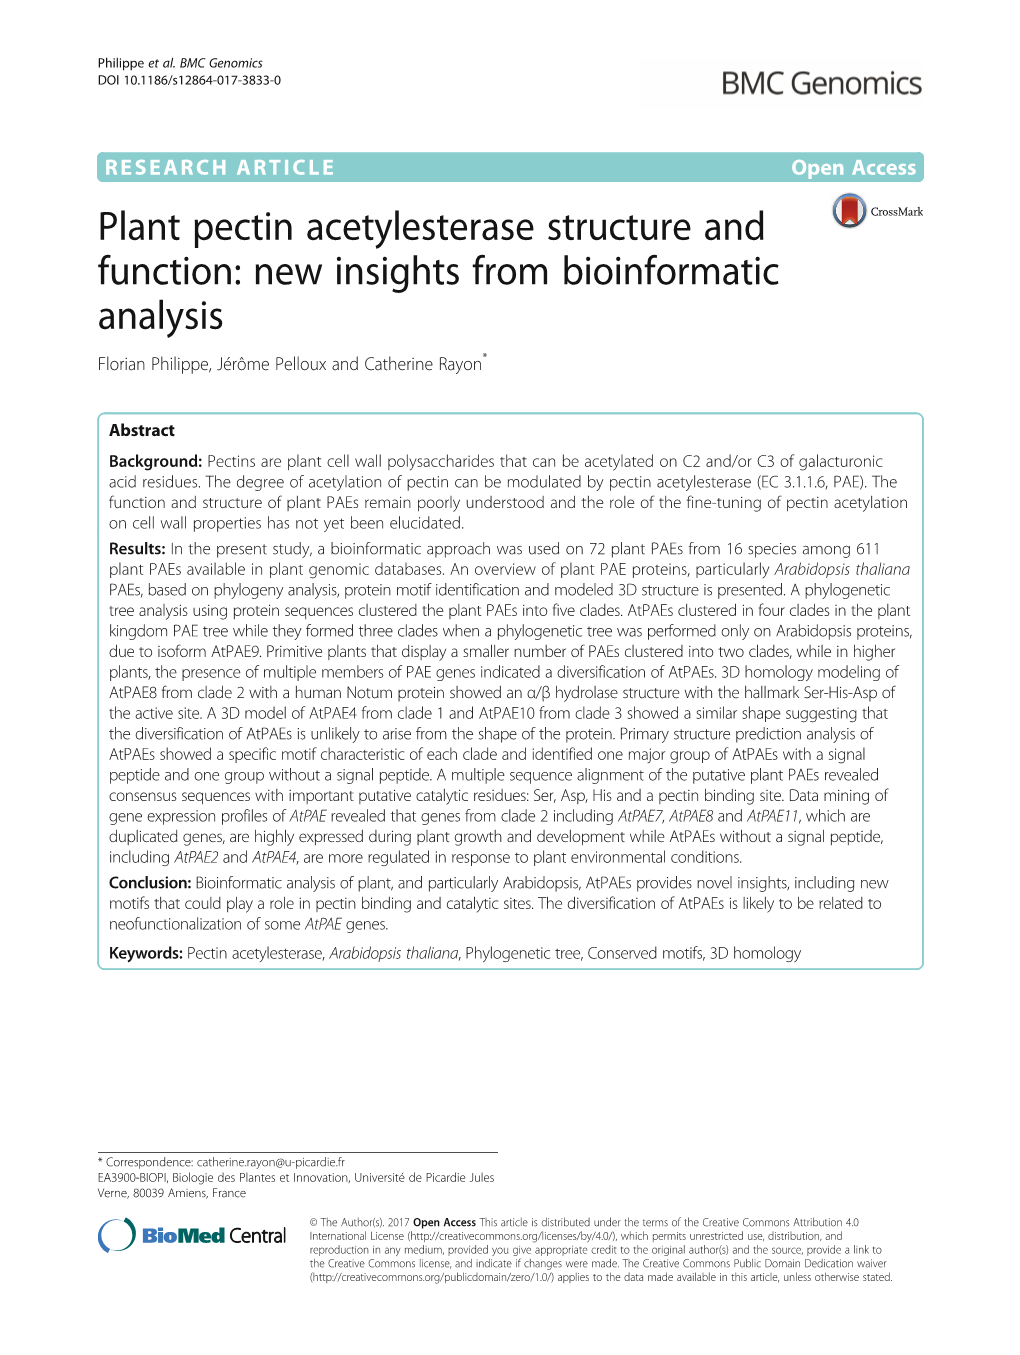 Plant Pectin Acetylesterase Structure and Function: New Insights from Bioinformatic Analysis Florian Philippe, Jérôme Pelloux and Catherine Rayon*